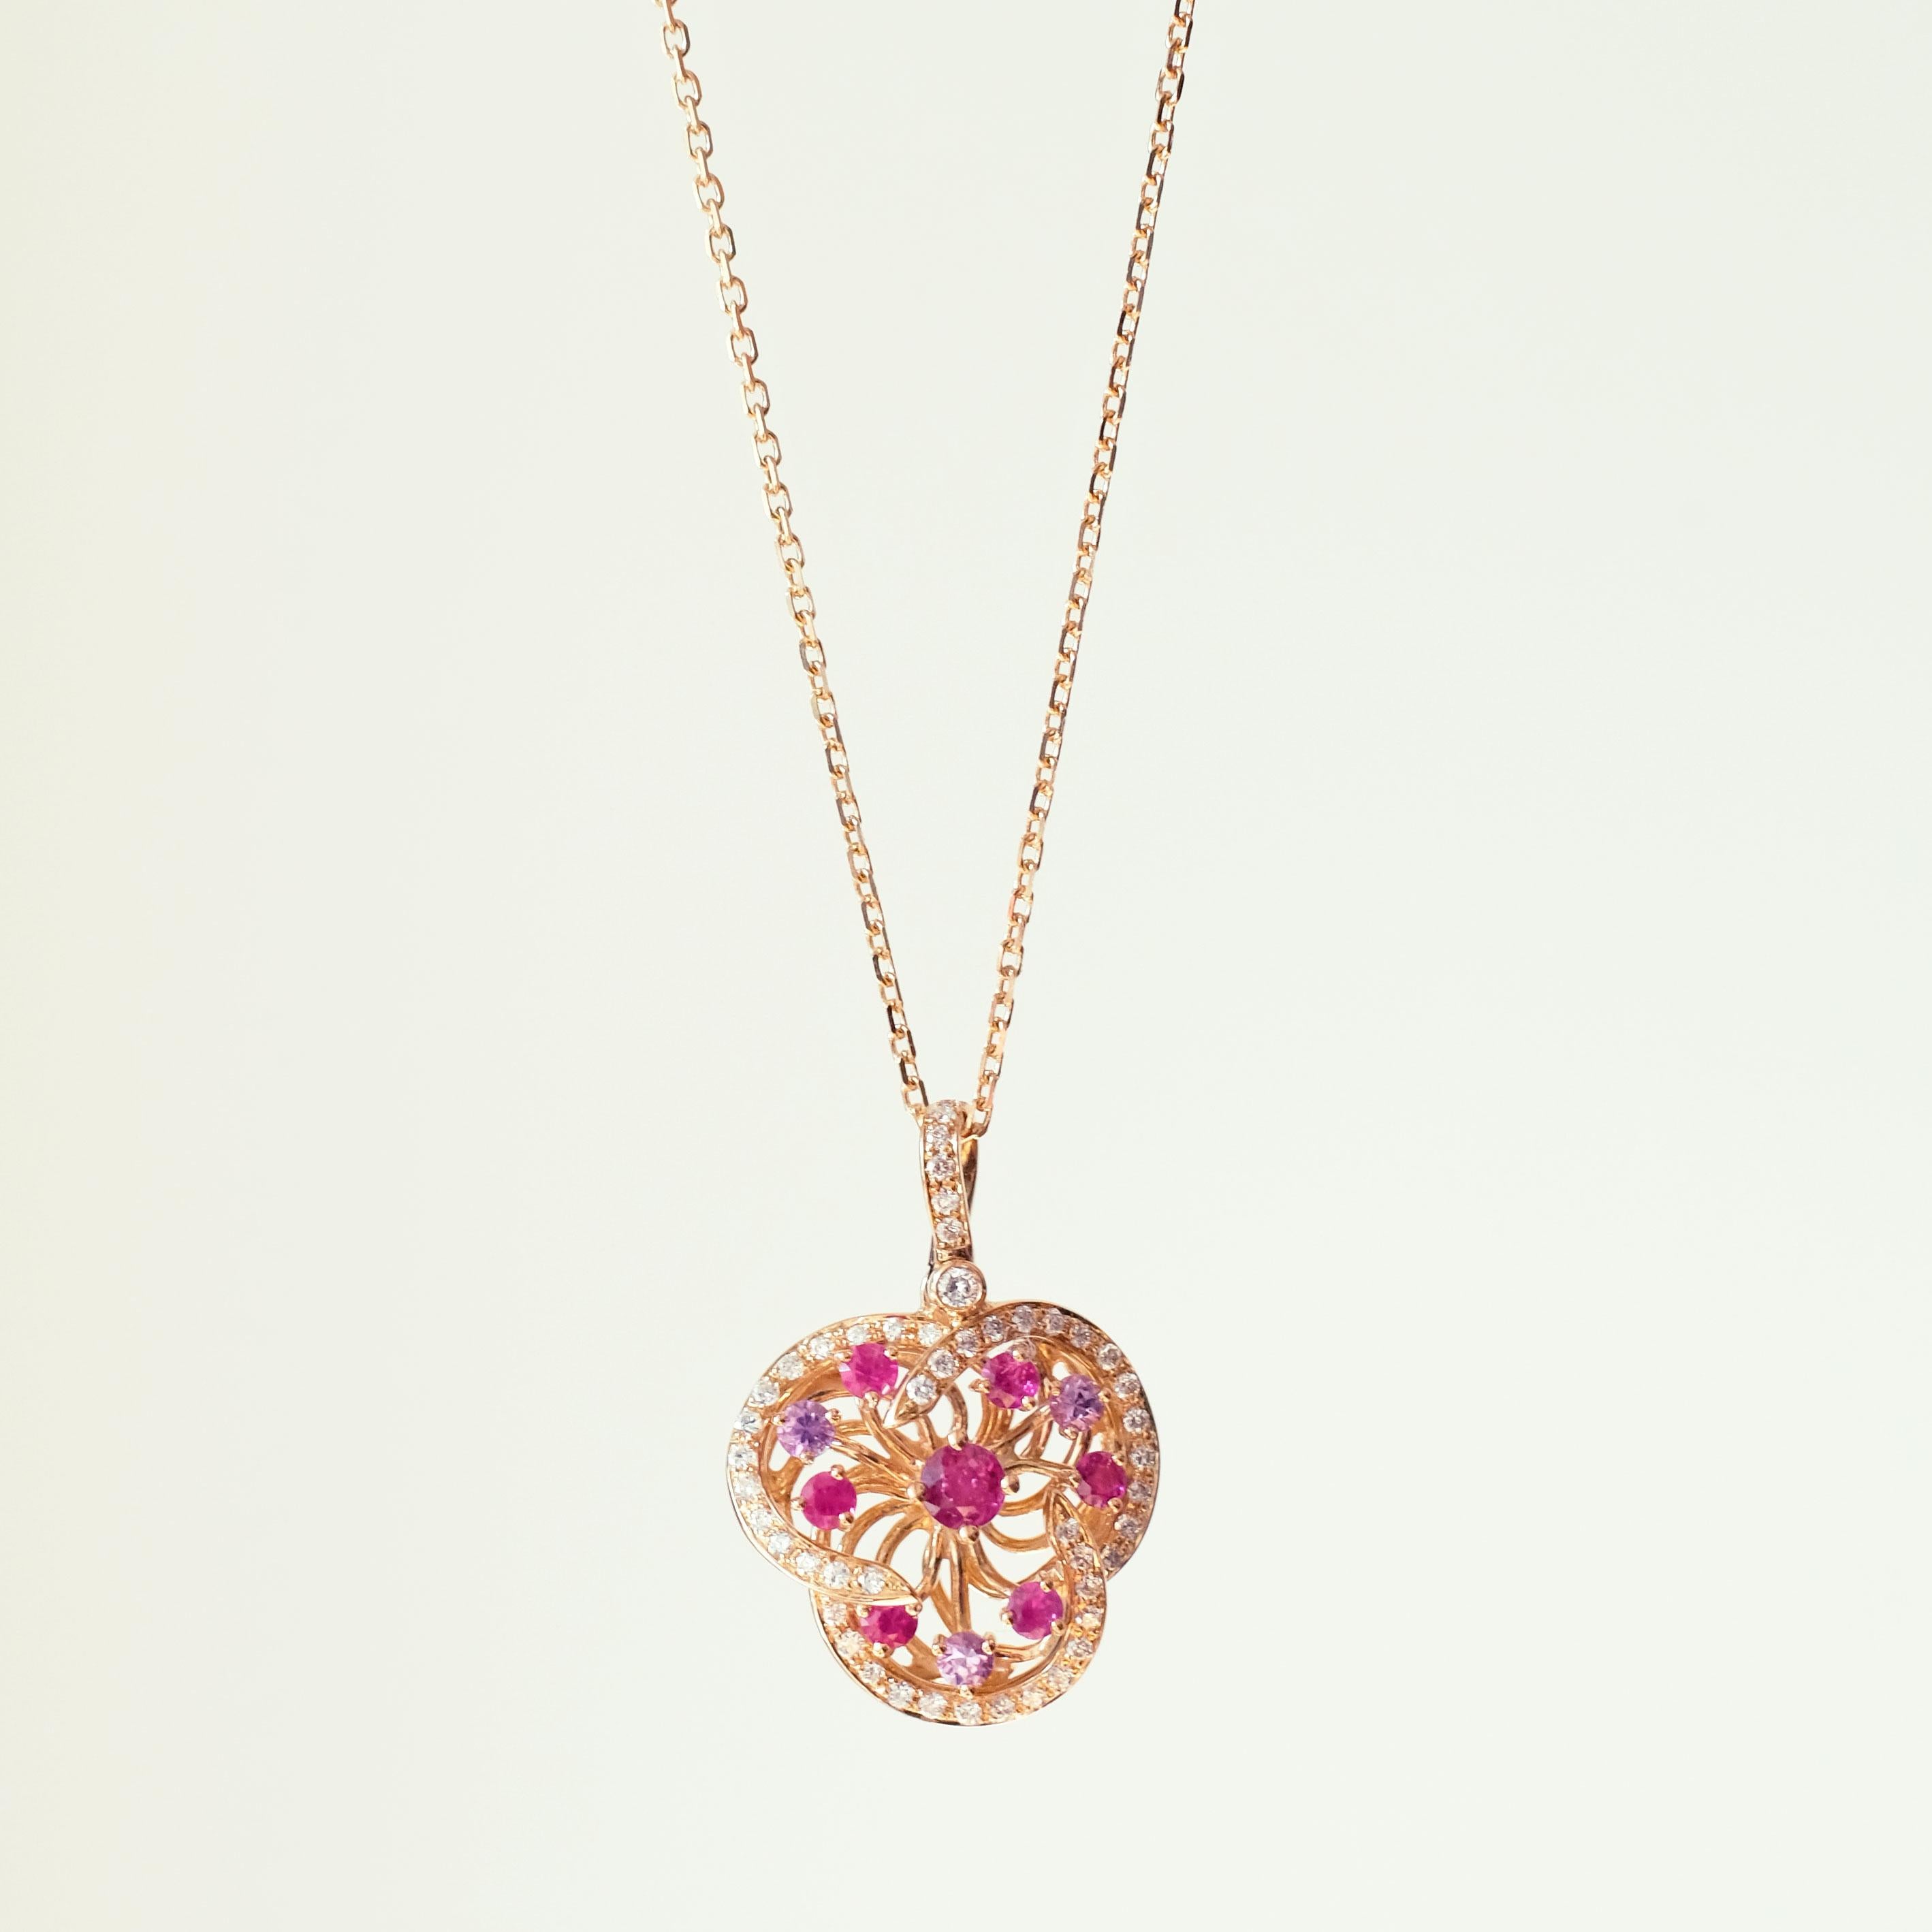 19.2K rose gold floral necklace with 49 brilliant cut diamonds with 0.28 ct. 7 pink sapphires with 0.70 ct. and 3 purple sapphires with 0.20 ct.

Crafted in rose 19.2K gold and set with a round pink sapphire, white diamonds, purple and pink